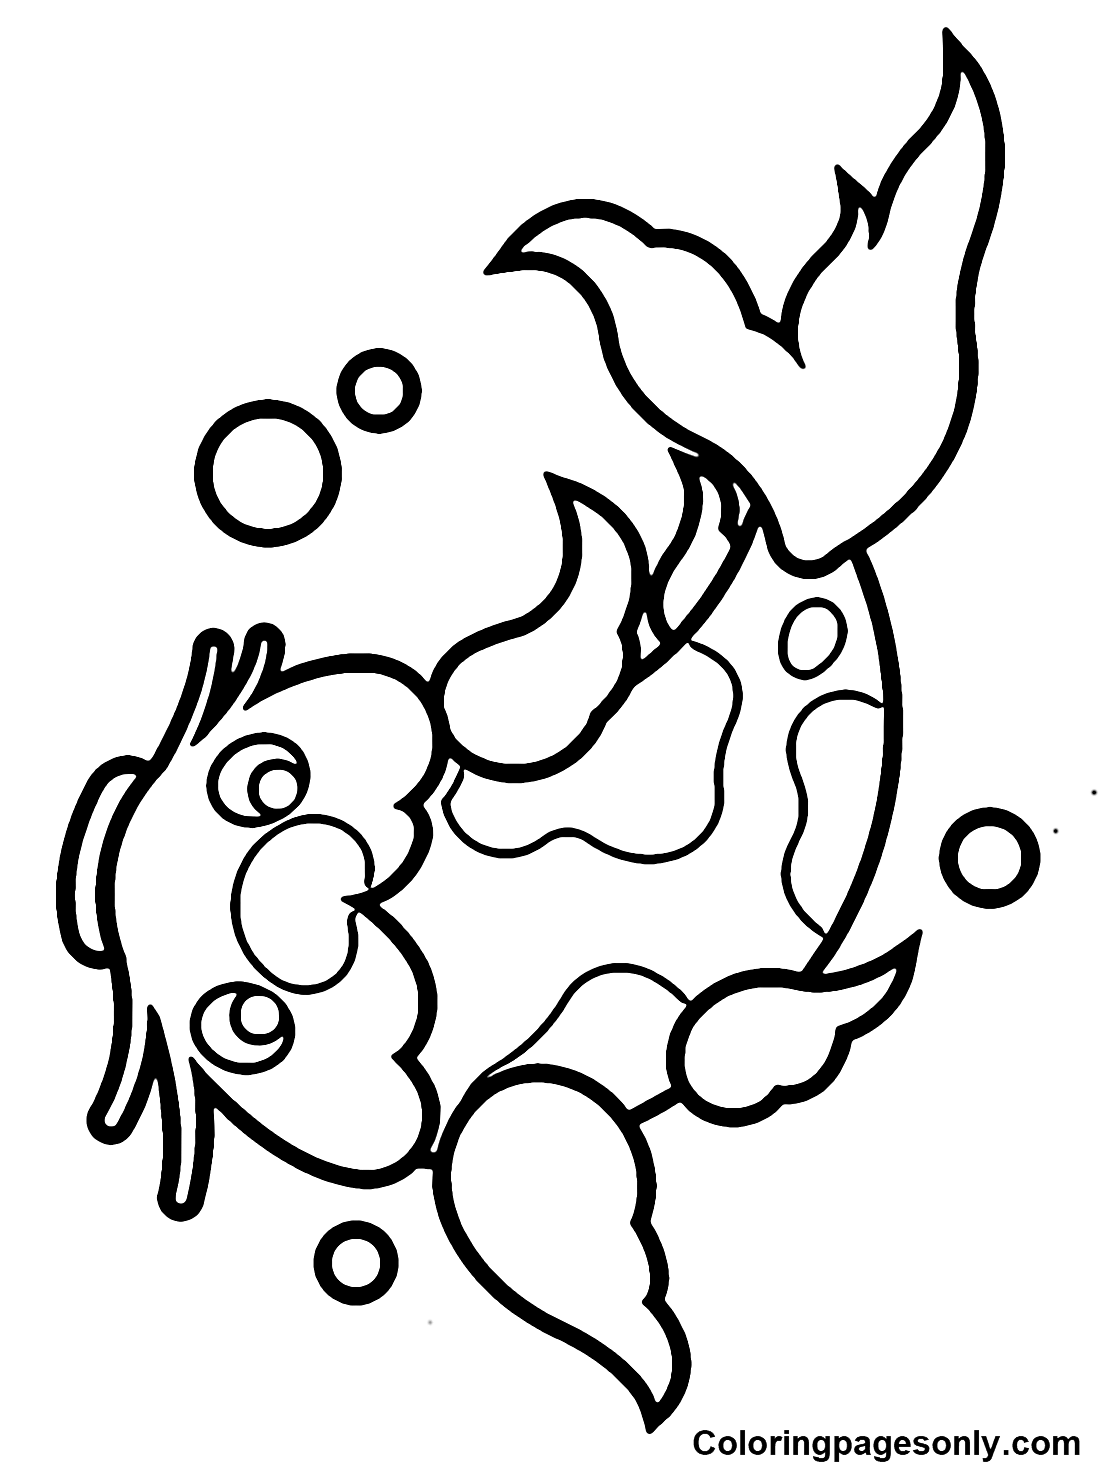 Cute Koi Fish Coloring Pages